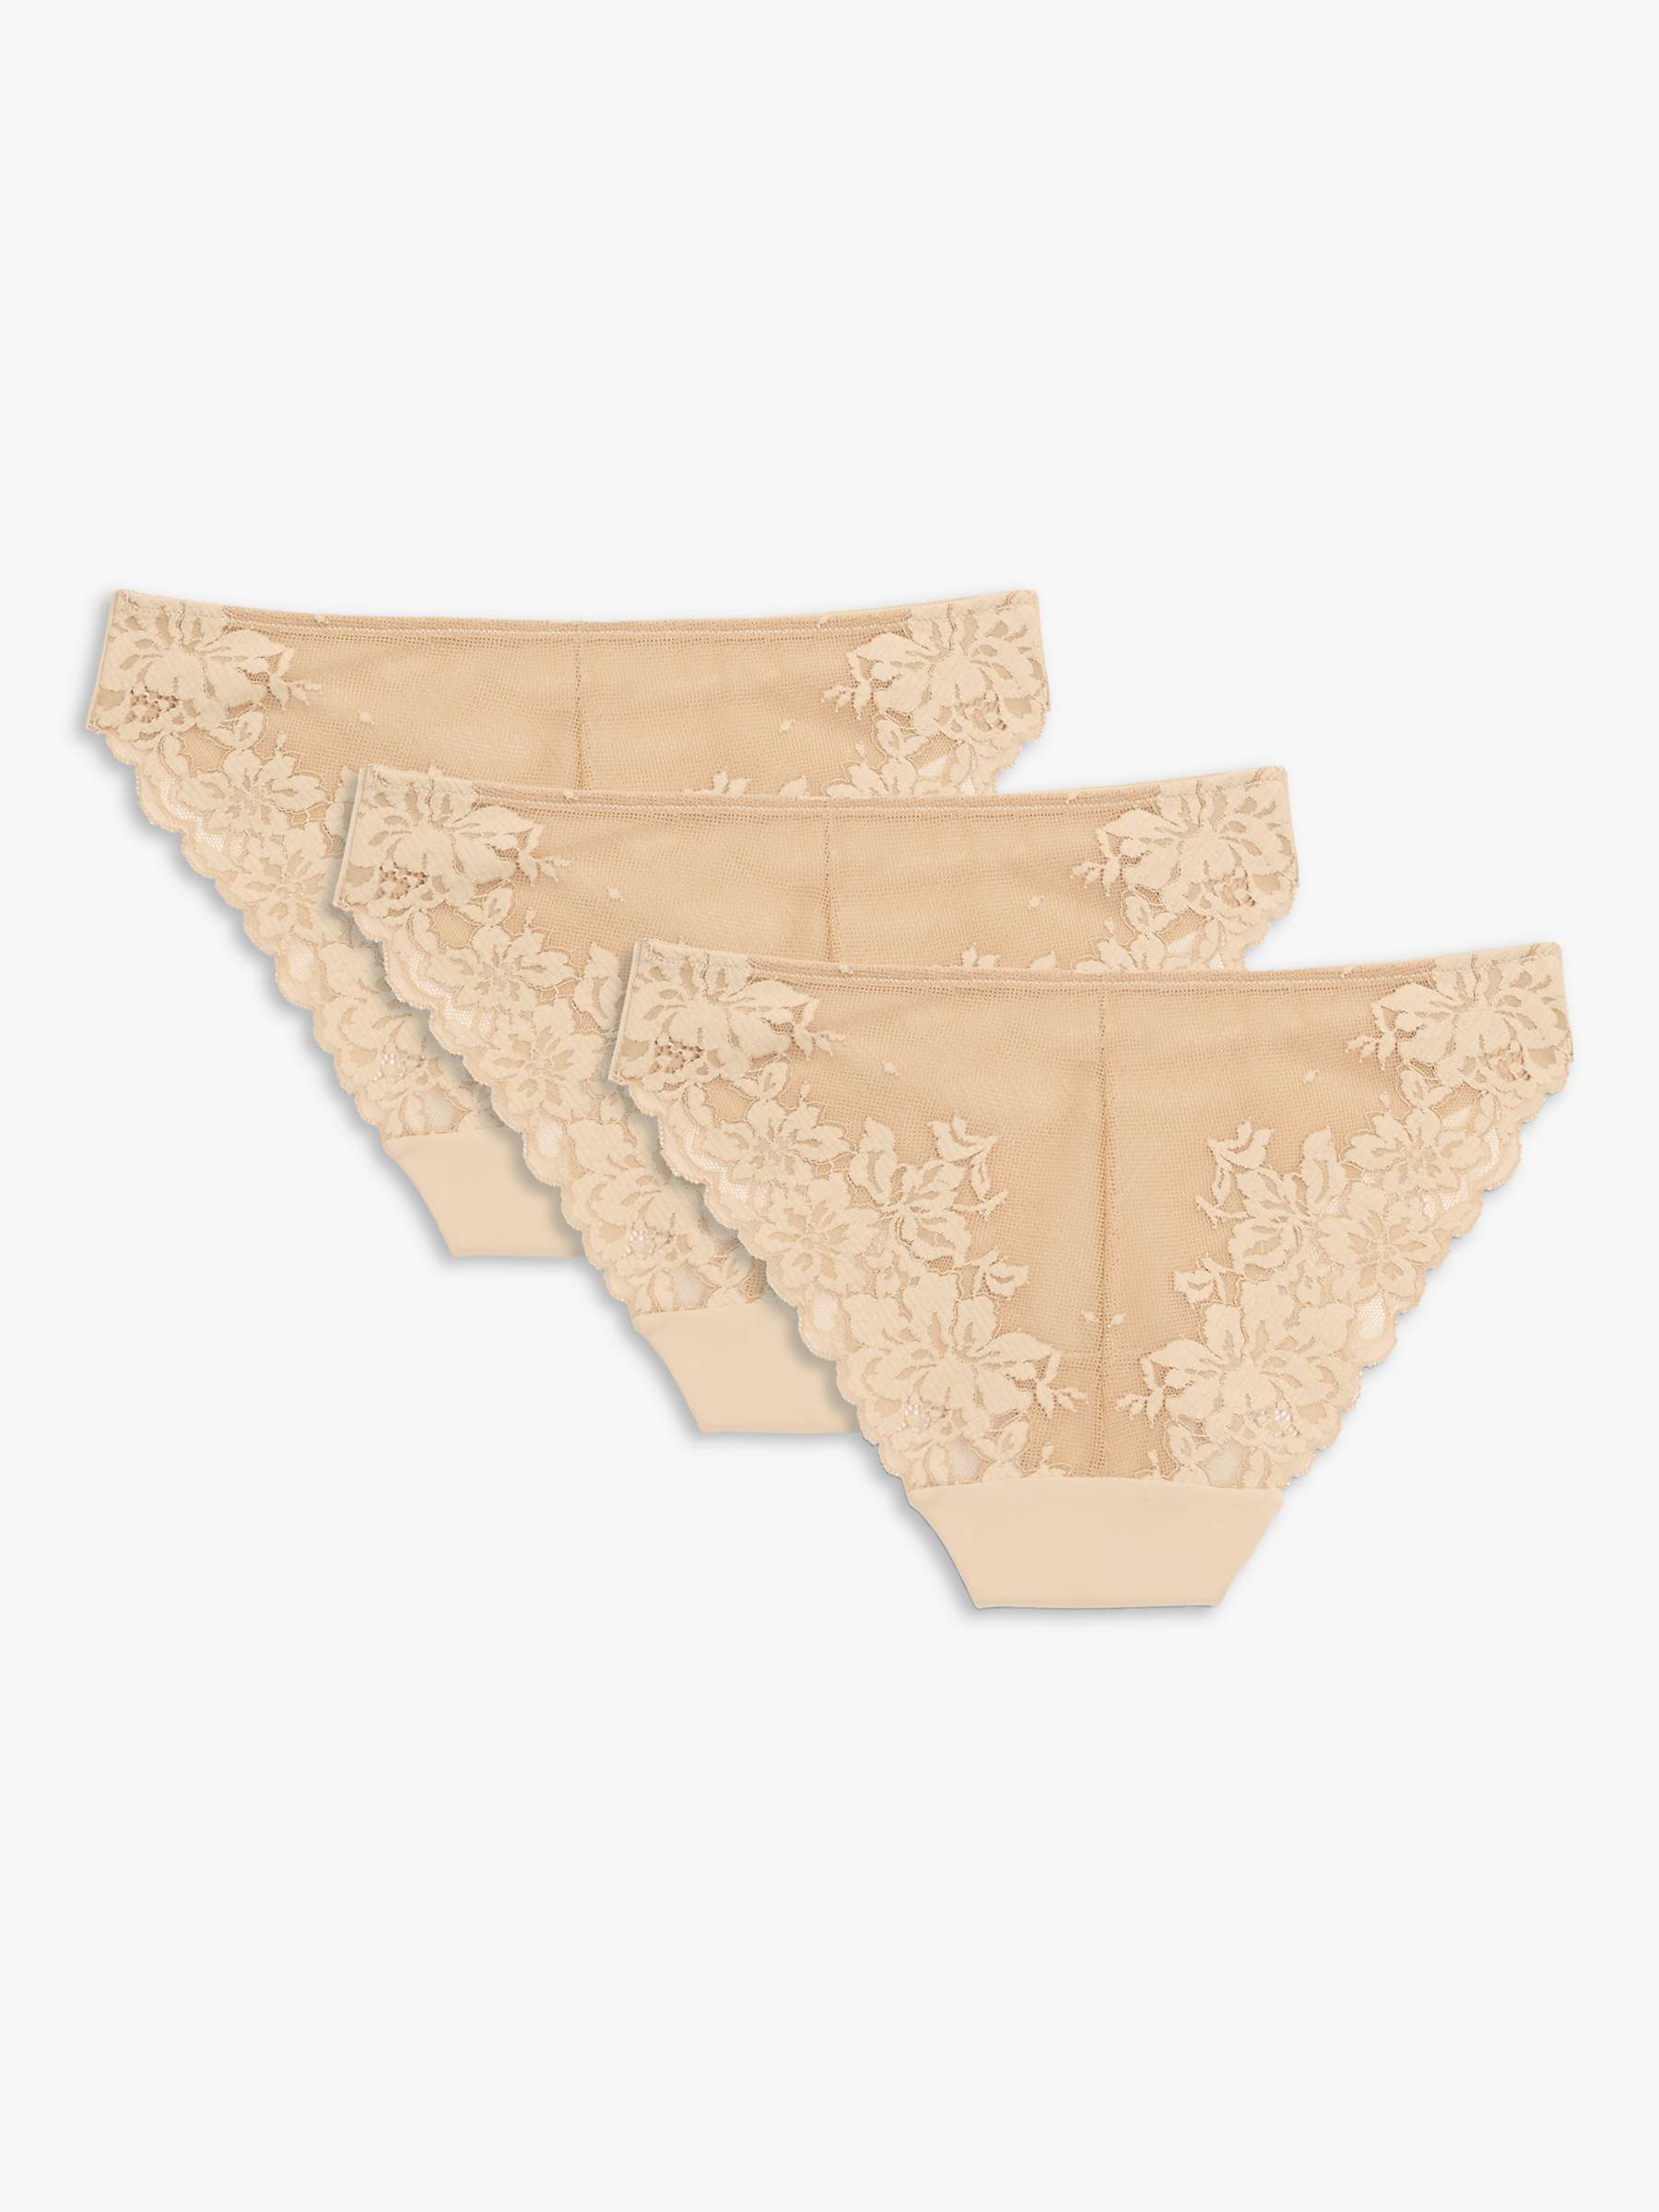 Buy John Lewis ANYDAY Microfibre Lace Bikini Knickers, Pack of 3 Online at johnlewis.com